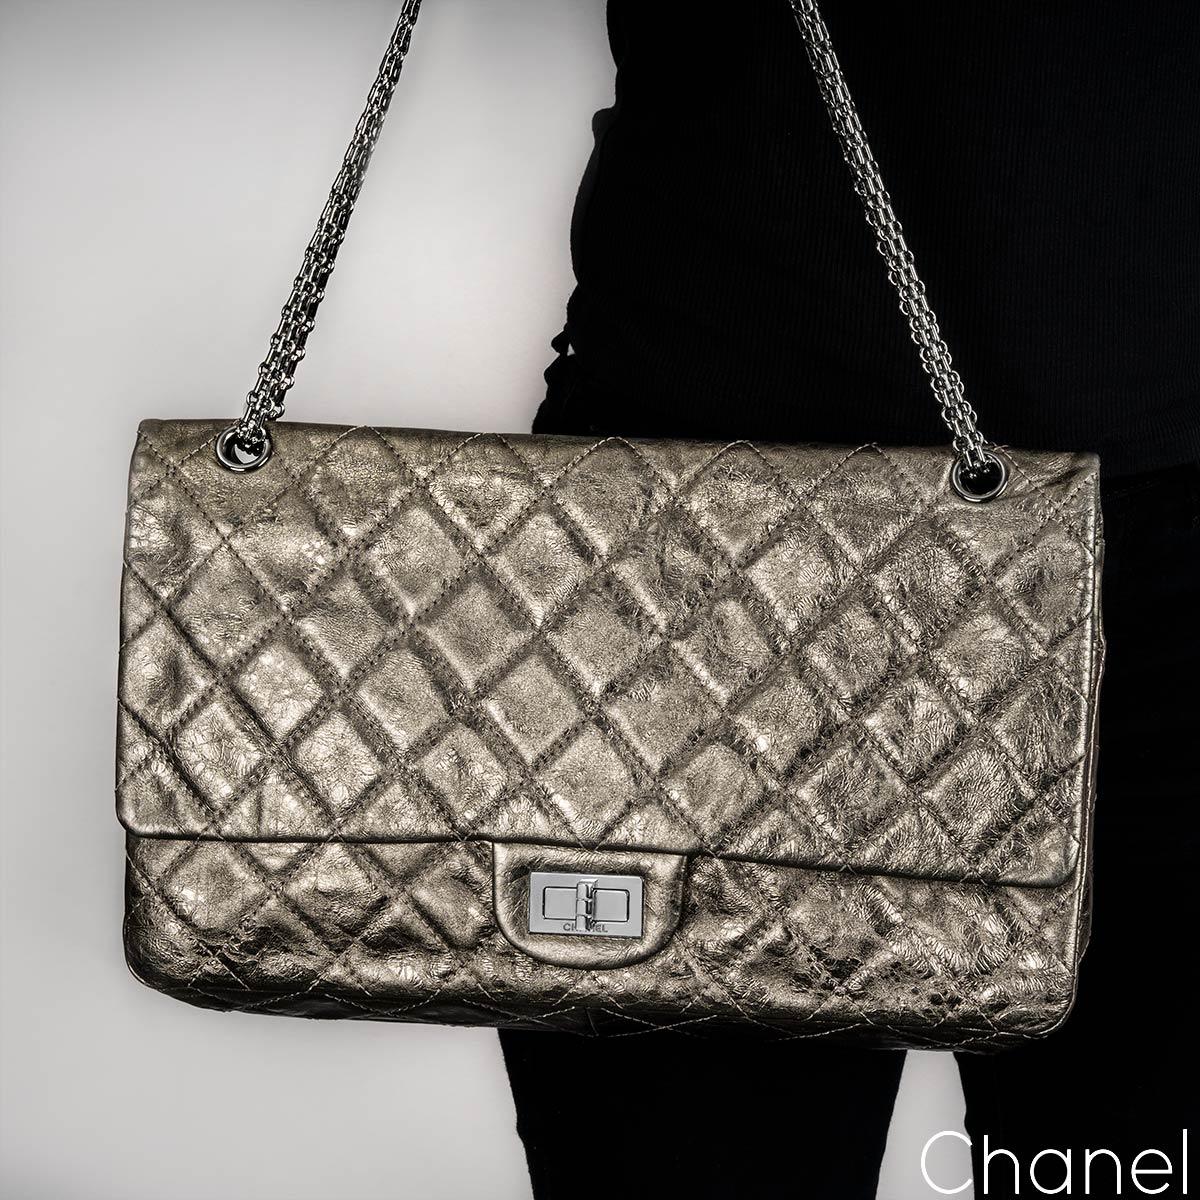 Chanel 2.55 Reissue Maxi Double Flap Bag For Sale 1